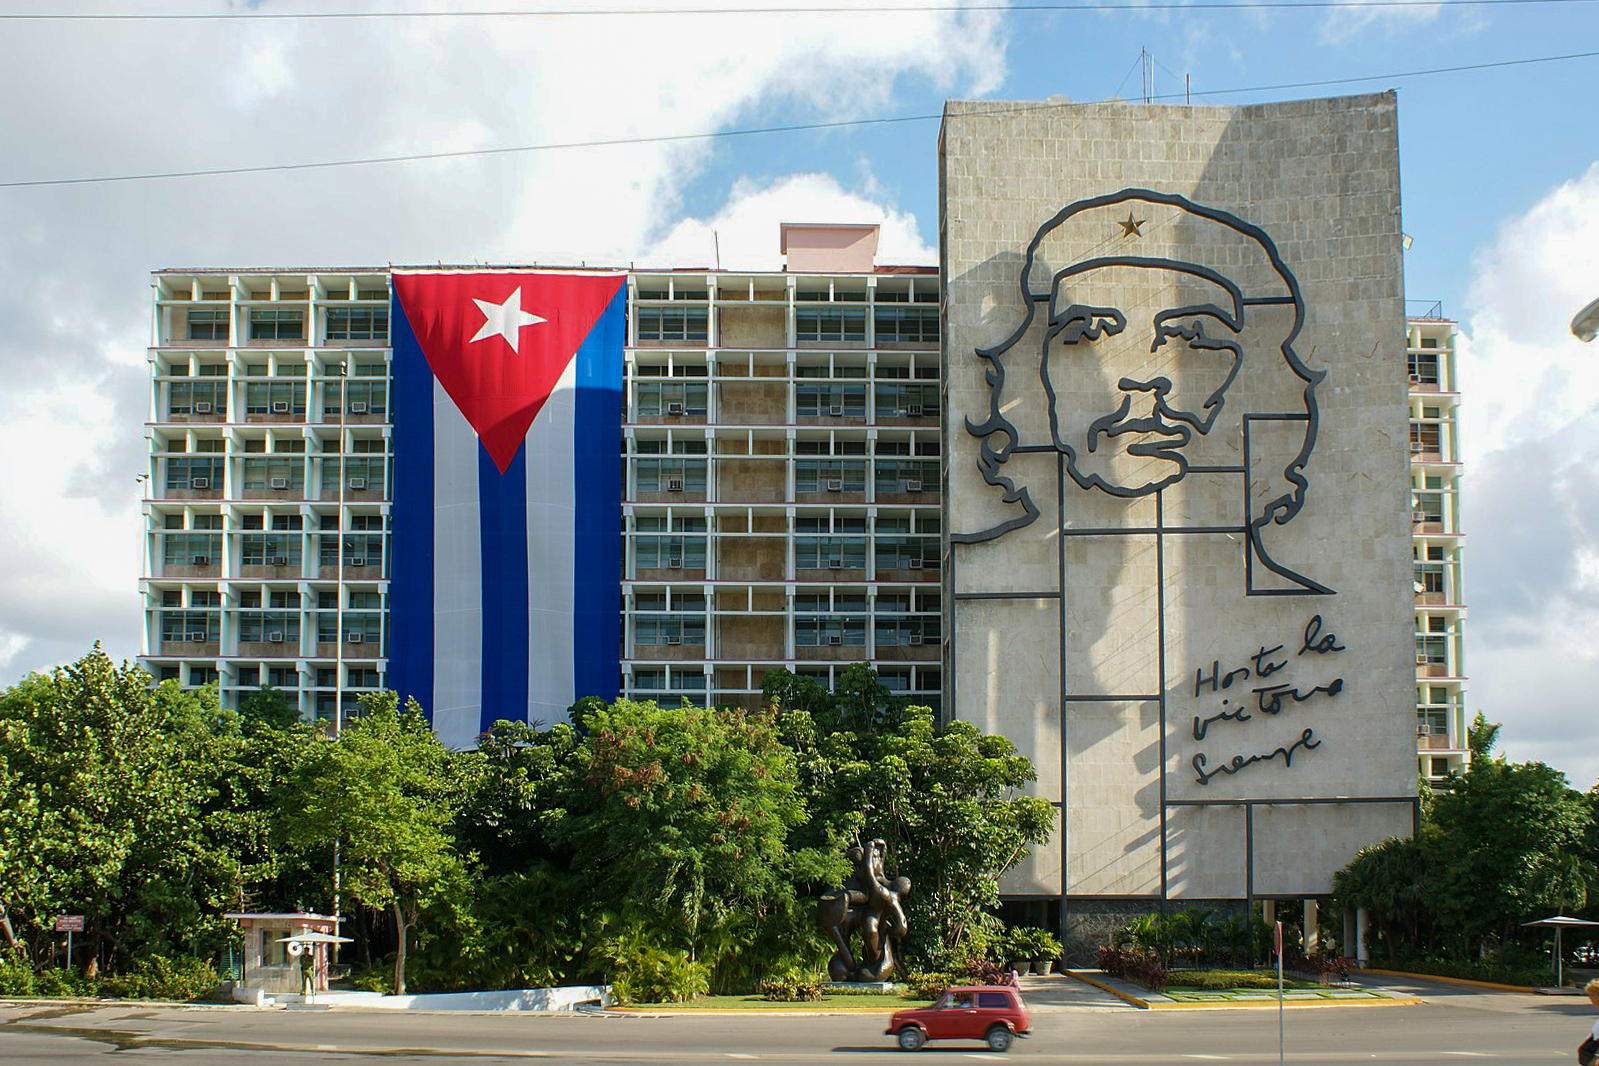 Ministry of the Interior building with "Che" Guevara portrait